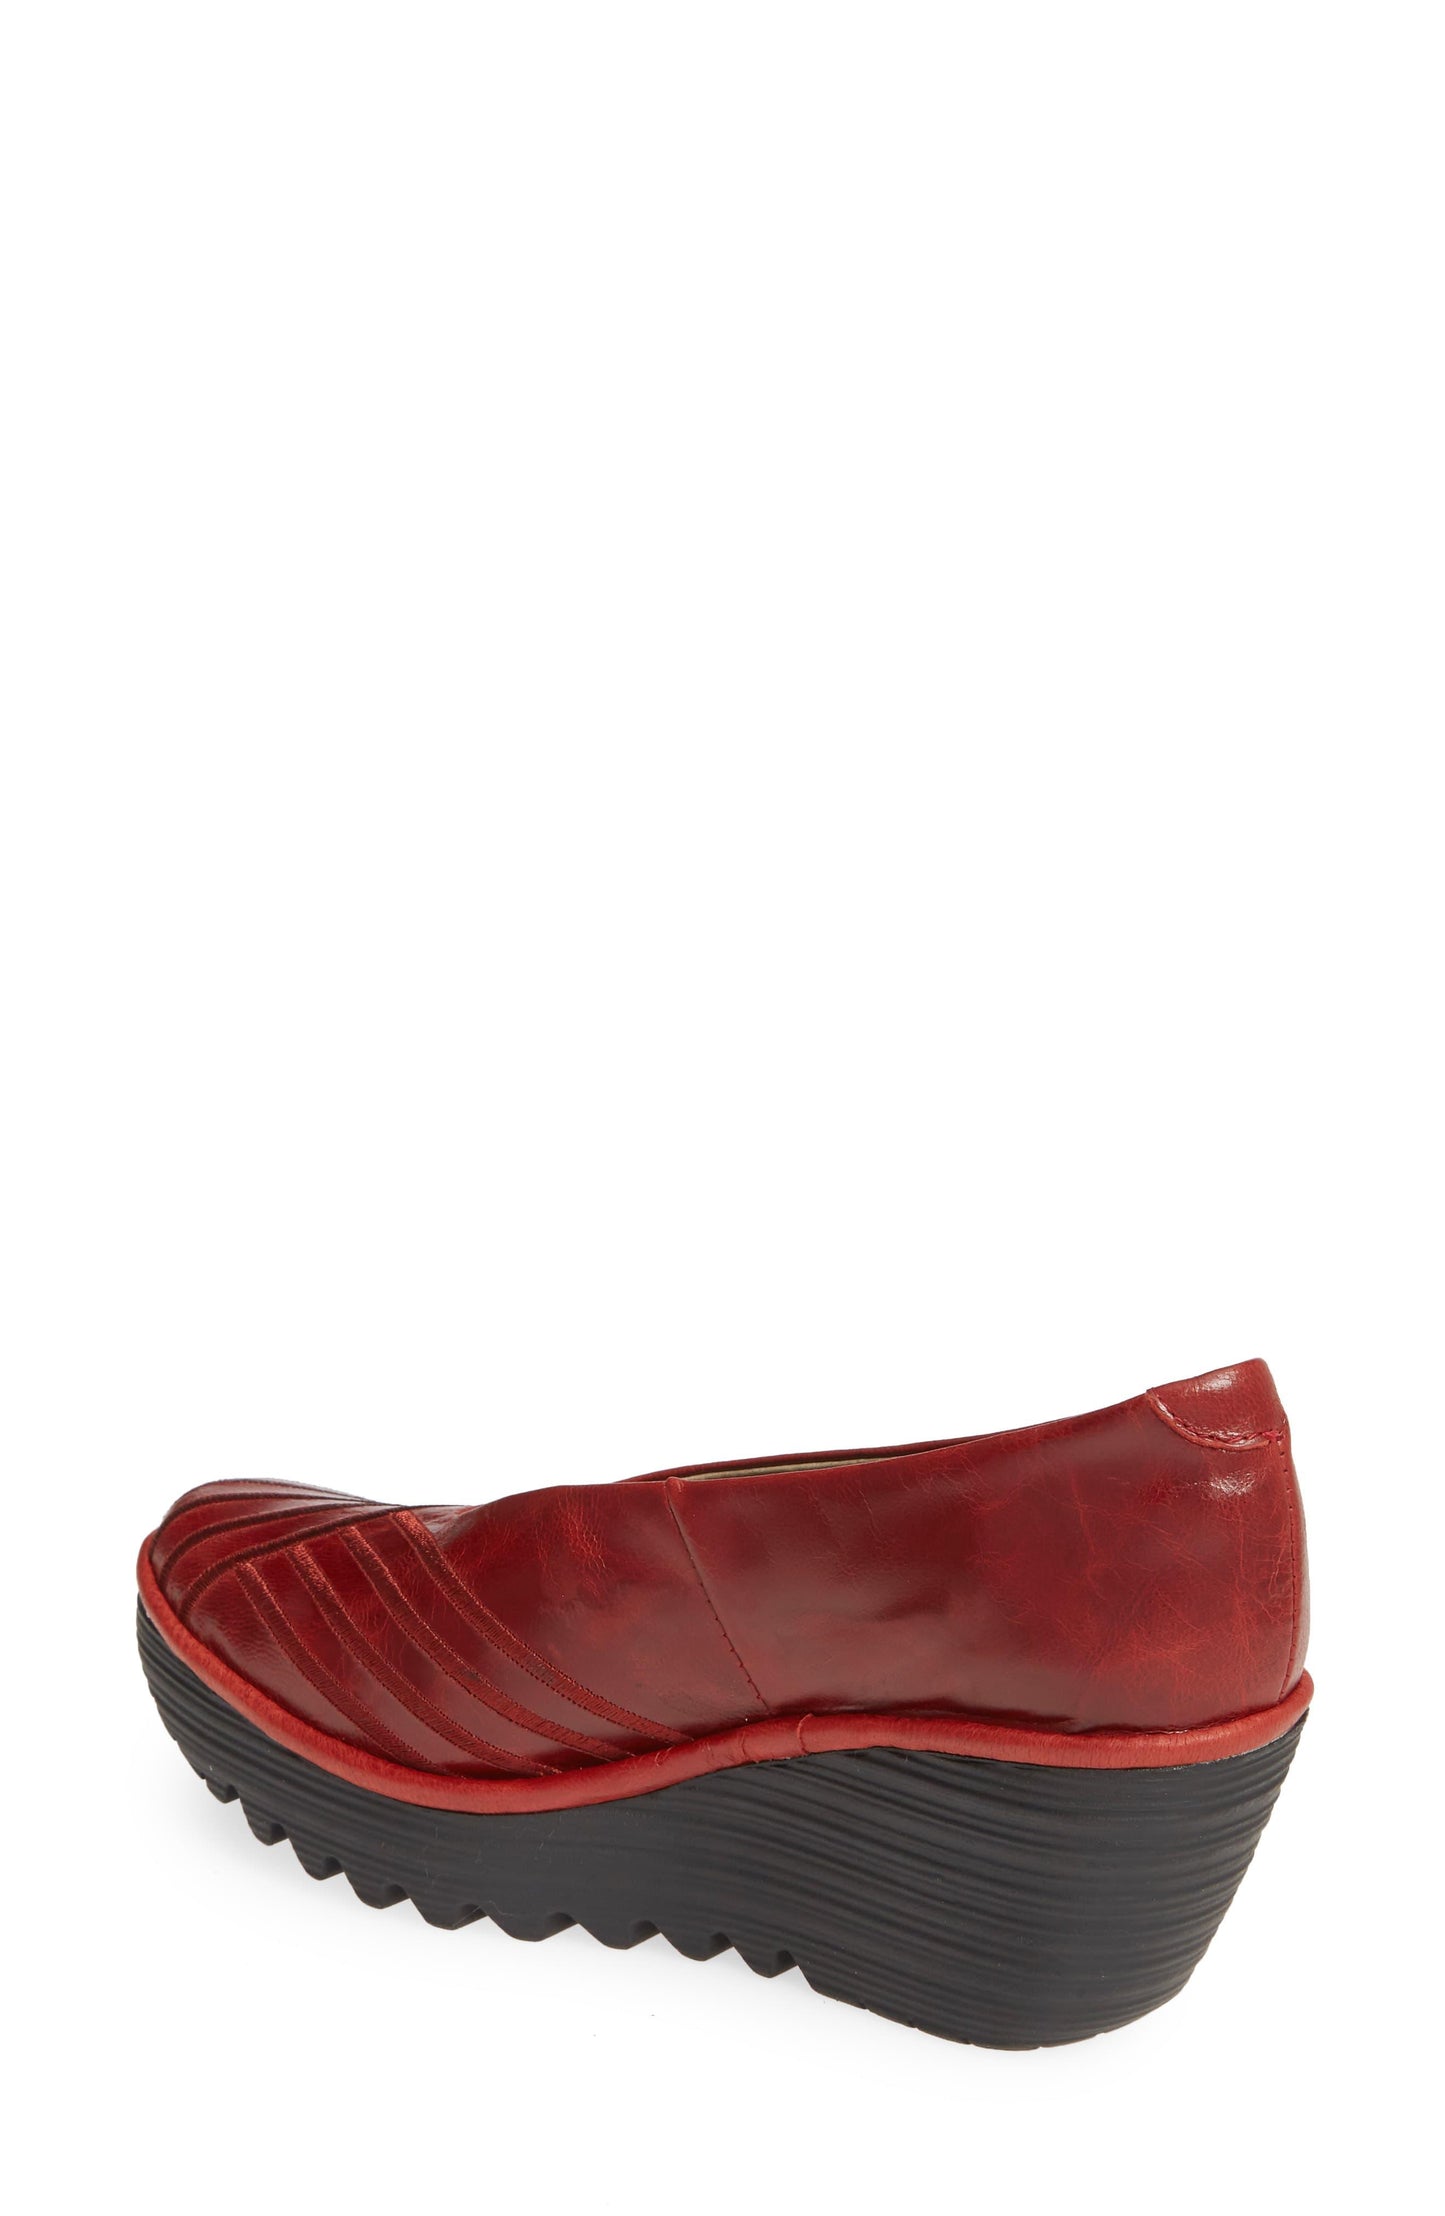 Fly London Yaku Columbia Red wedge shoe. Only sizes 6 and 8 left.